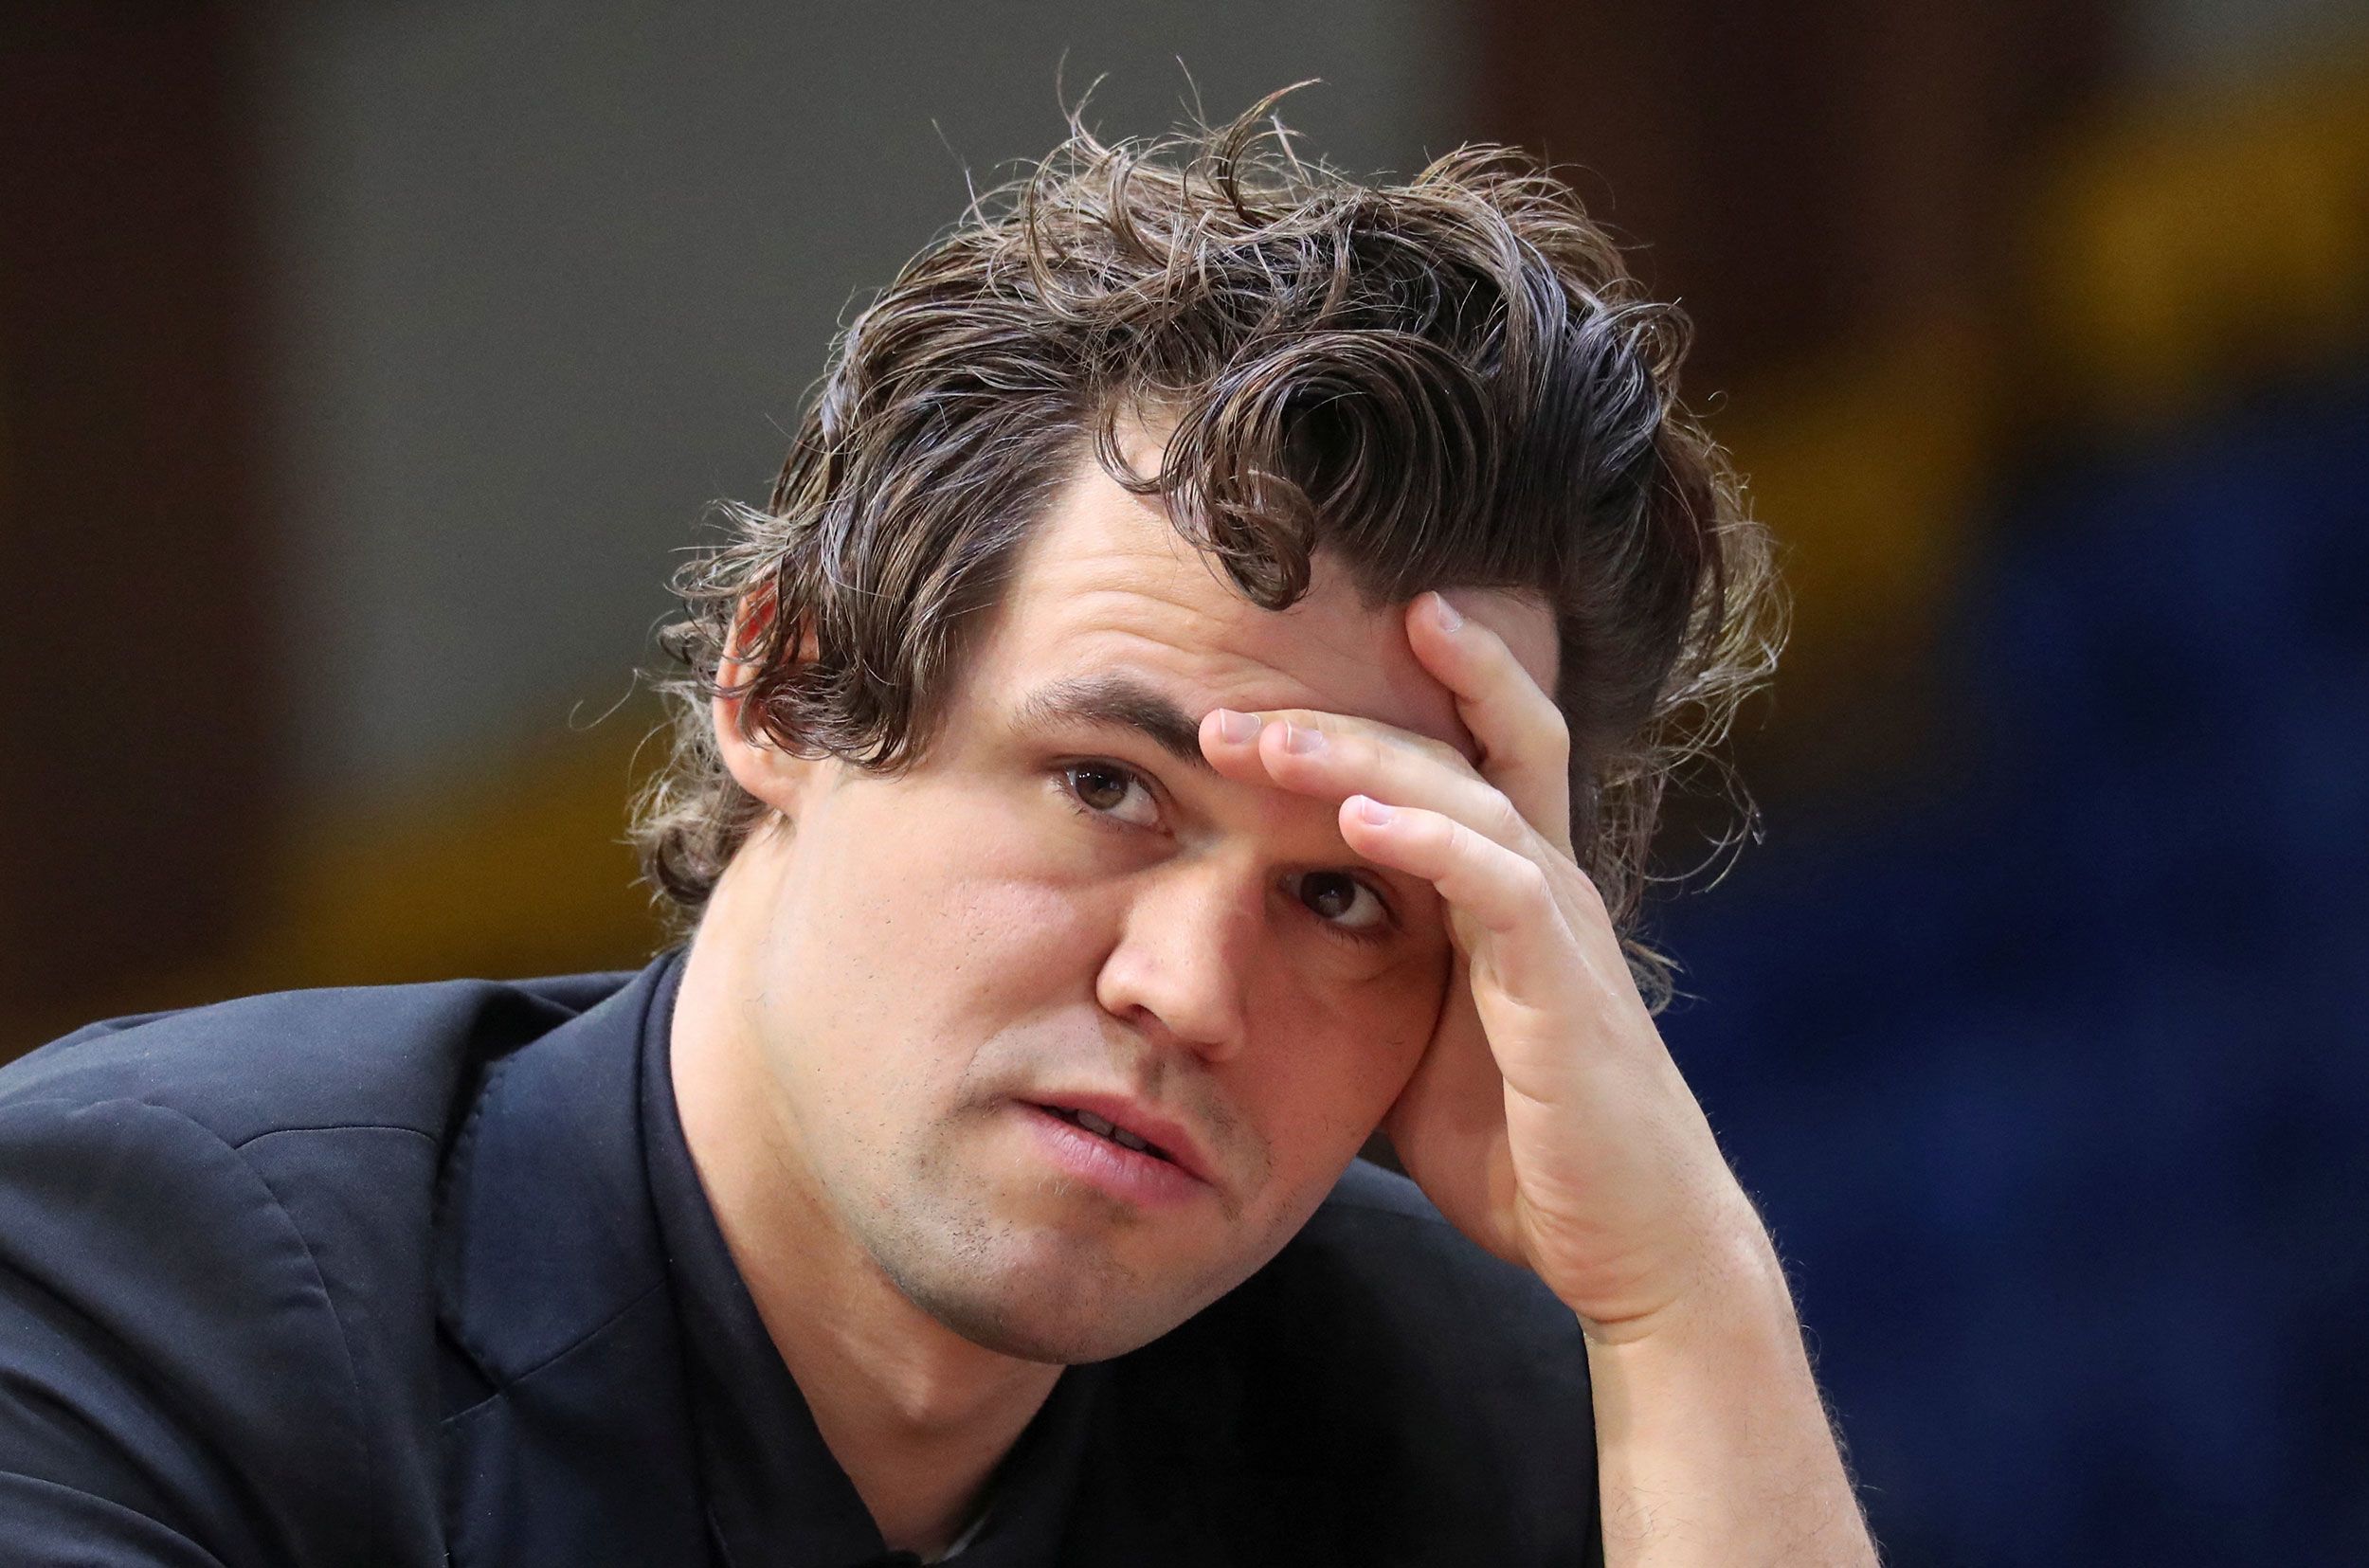 Chessable Masters: Carlsen and Nepomniachtchi storm into semis